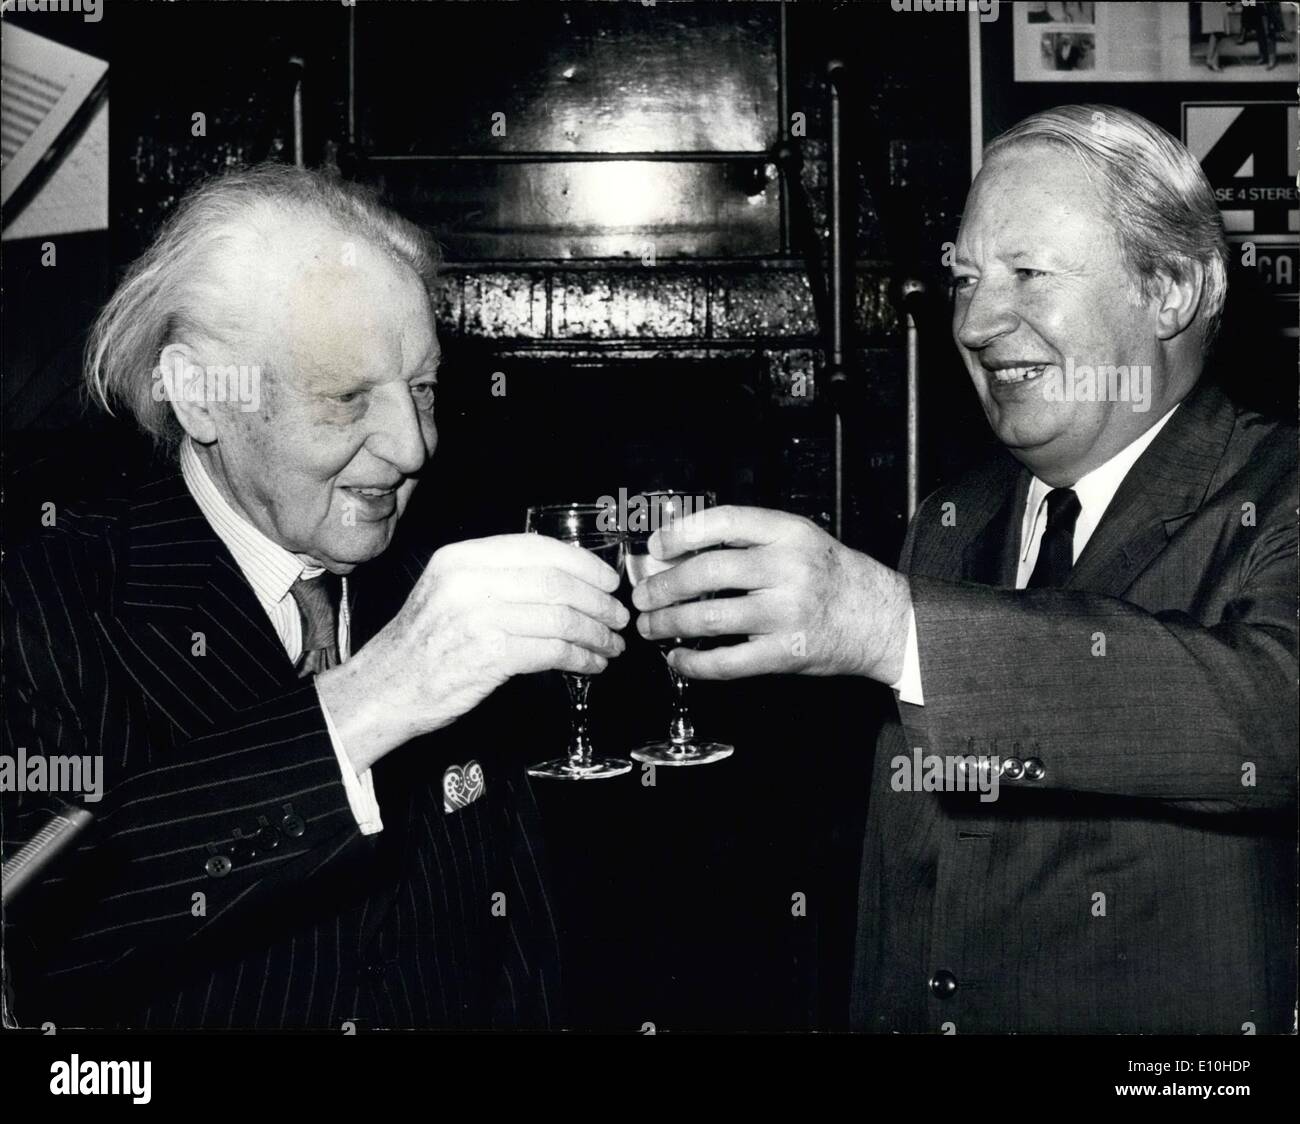 Feb. 02, 1973 - Leopold Stokowski At Reception A Champagne reception was held on the concert platform of the Royal Albert Hall for Leopold Stokowski to mark the release of his 60th Anniversary recordings commemorating sixty years association with the London Symphony Orchestra. Photo Shows:- Leopold Stokowski toasts the success of his new recording with the Prime Minister, Mr. Heath, at reception. Stock Photo